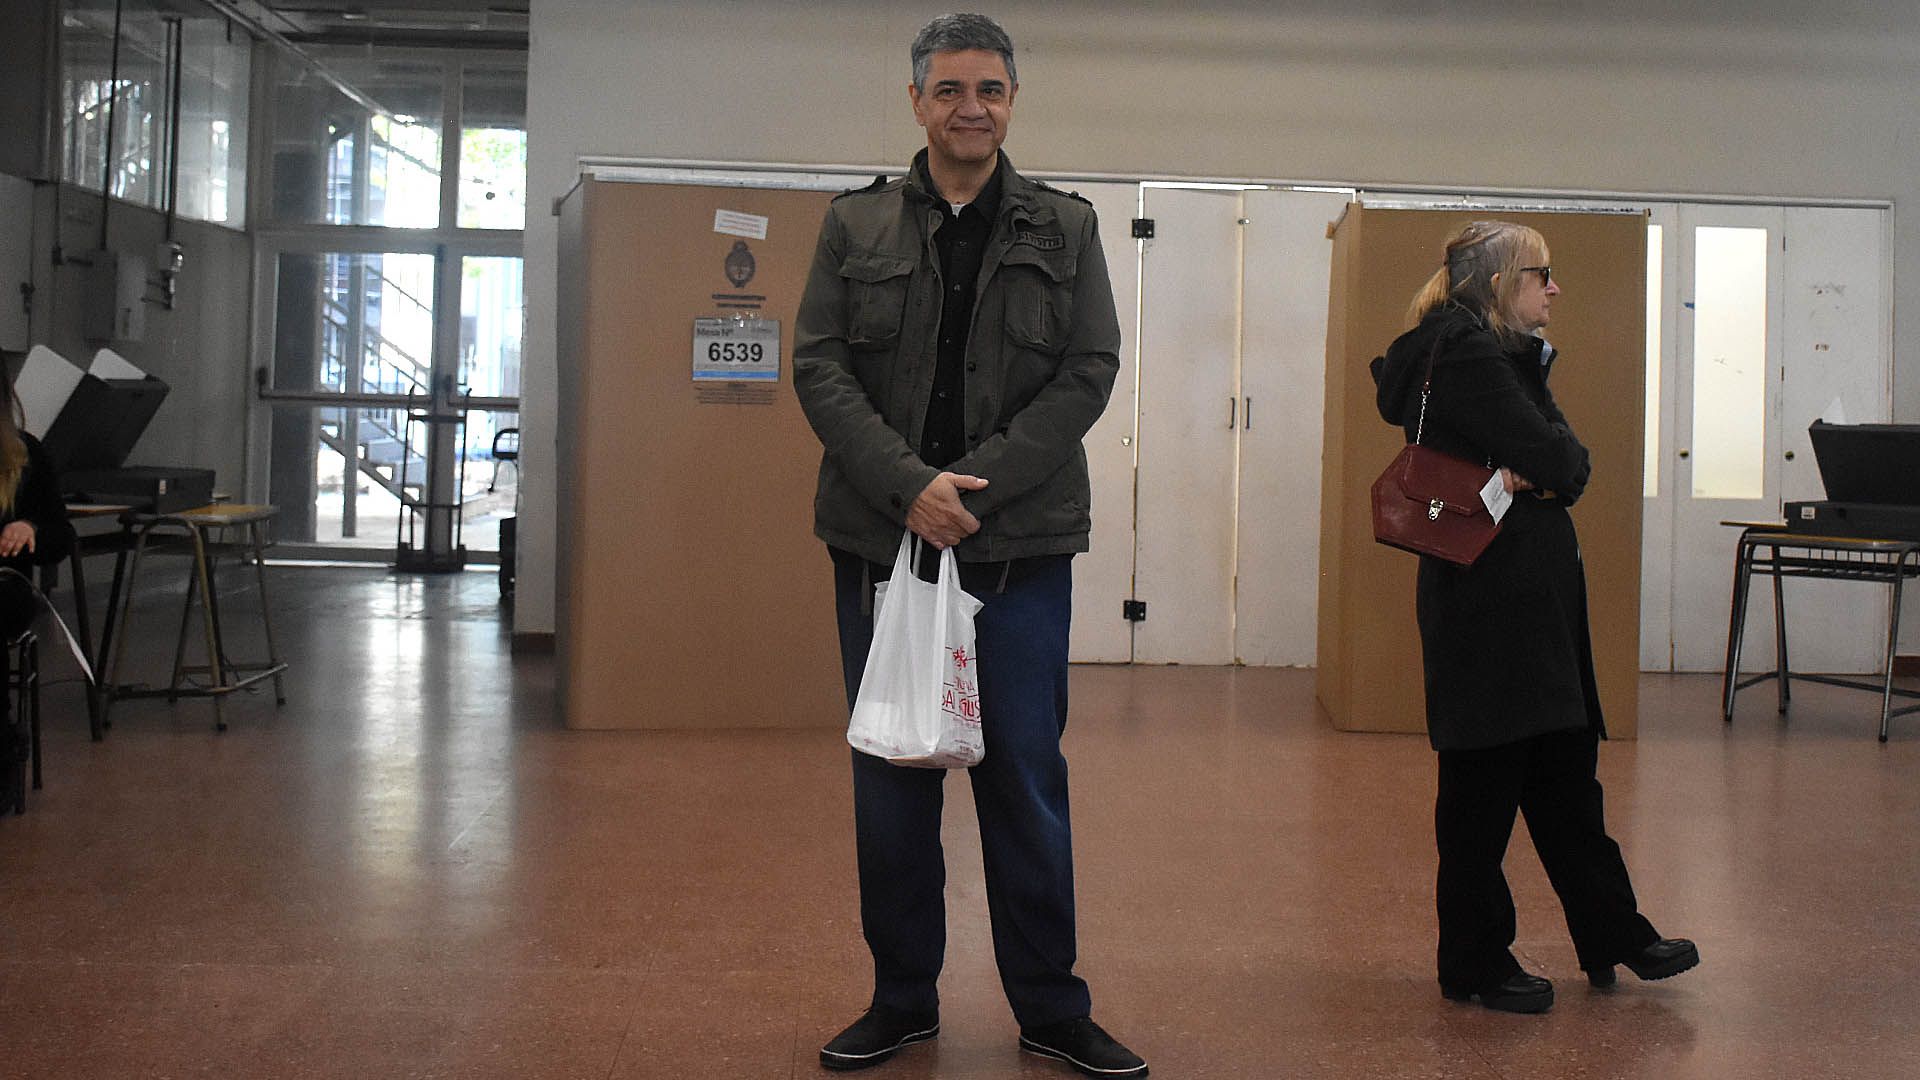 The candidate for head of government of Together for Change arrived at the Lenguas Vivas institute, his polling place, with invoices for the table authorities (Nicolás Stulberg)